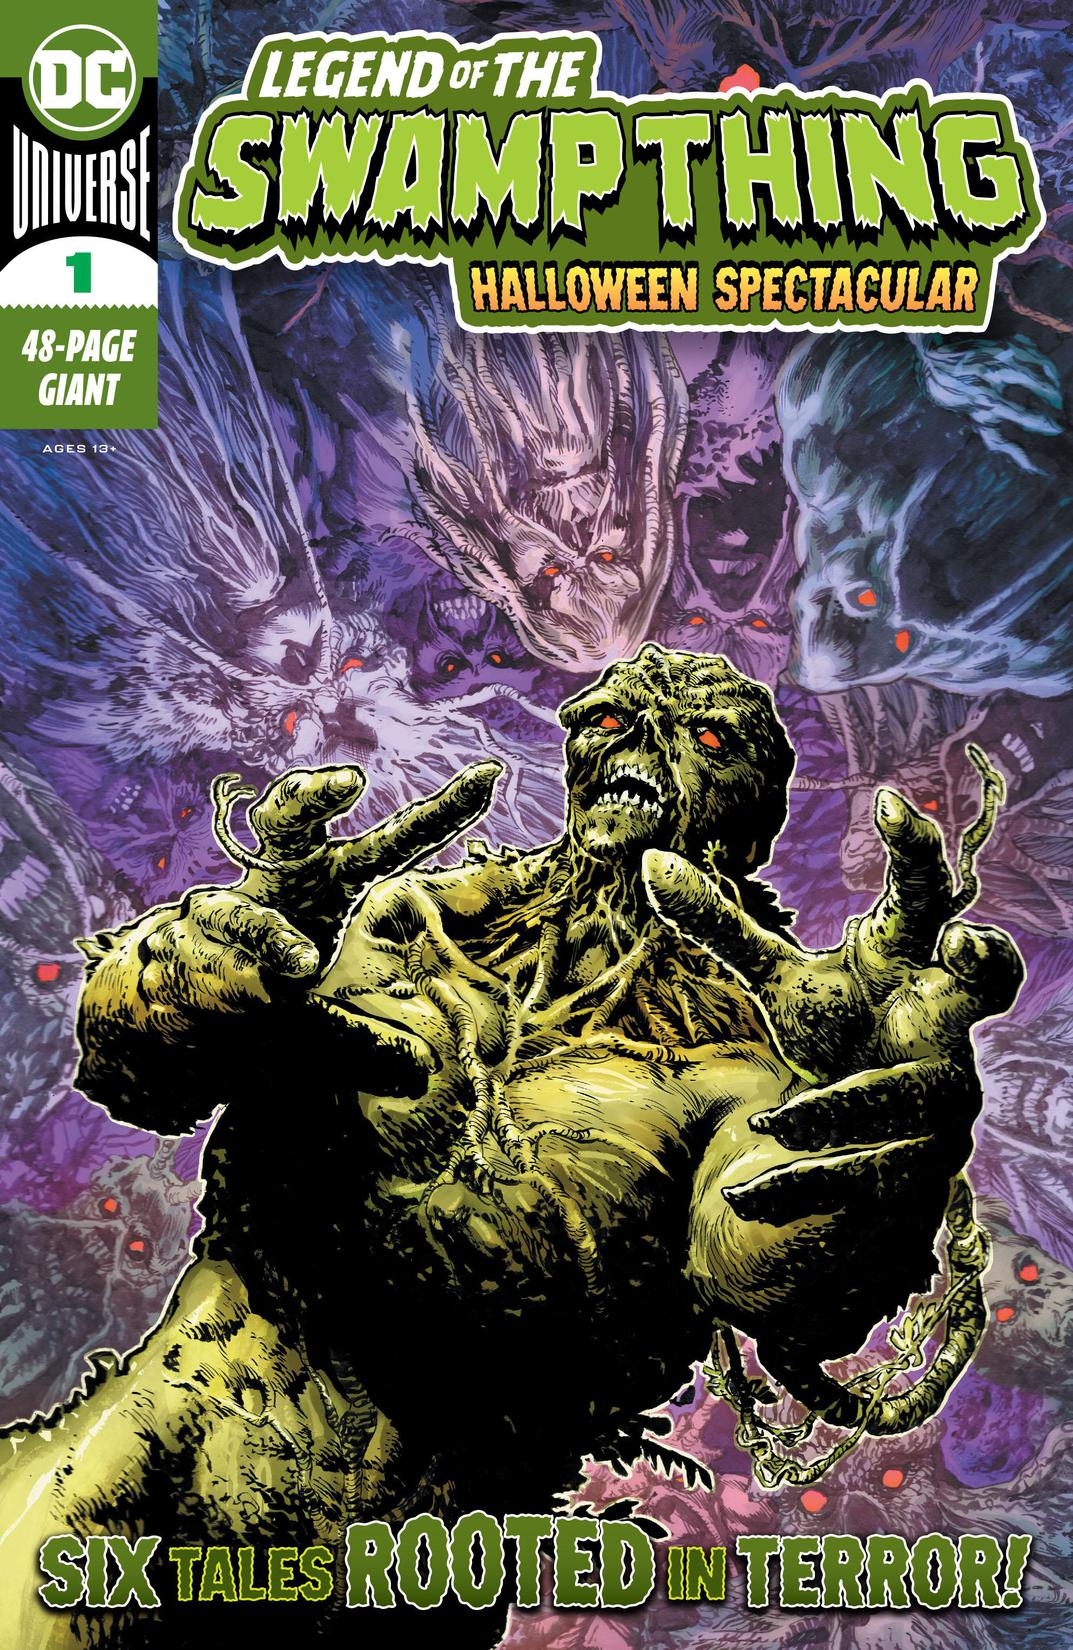 Legend of the Swamp Thing Halloween Spectacular #1 preview images